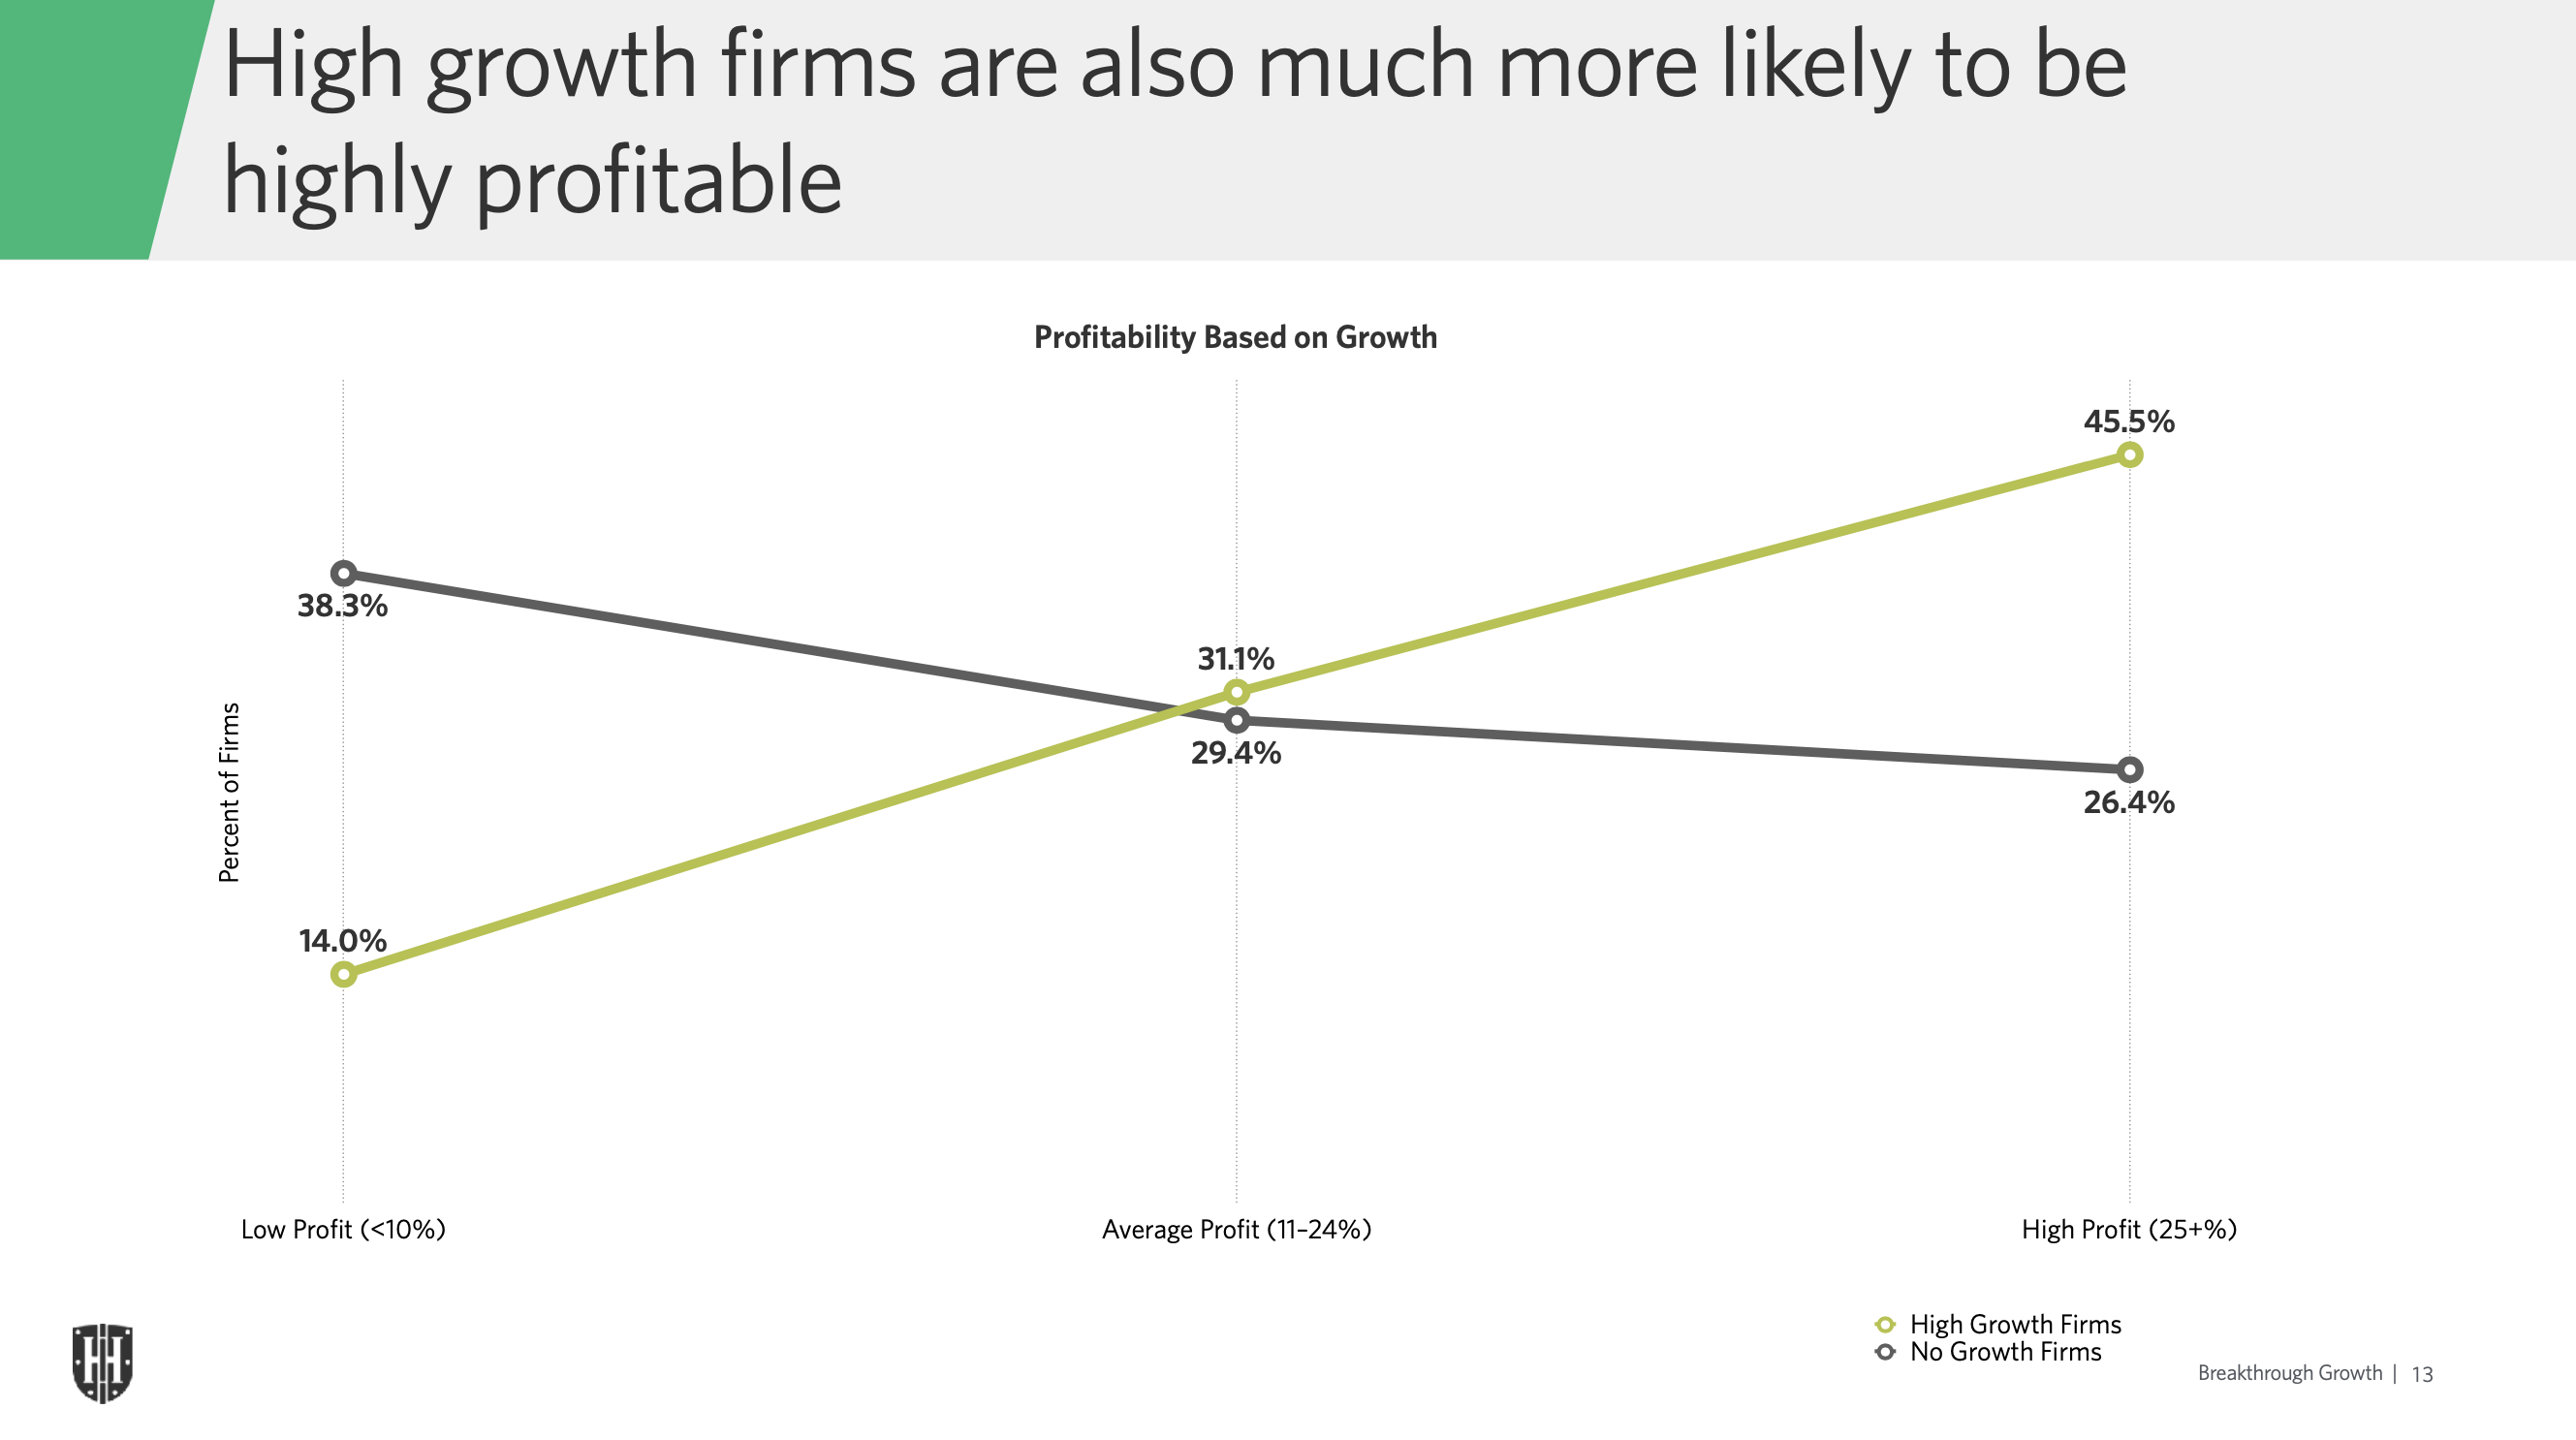 High Growth firms are more likely to be highly profitabble